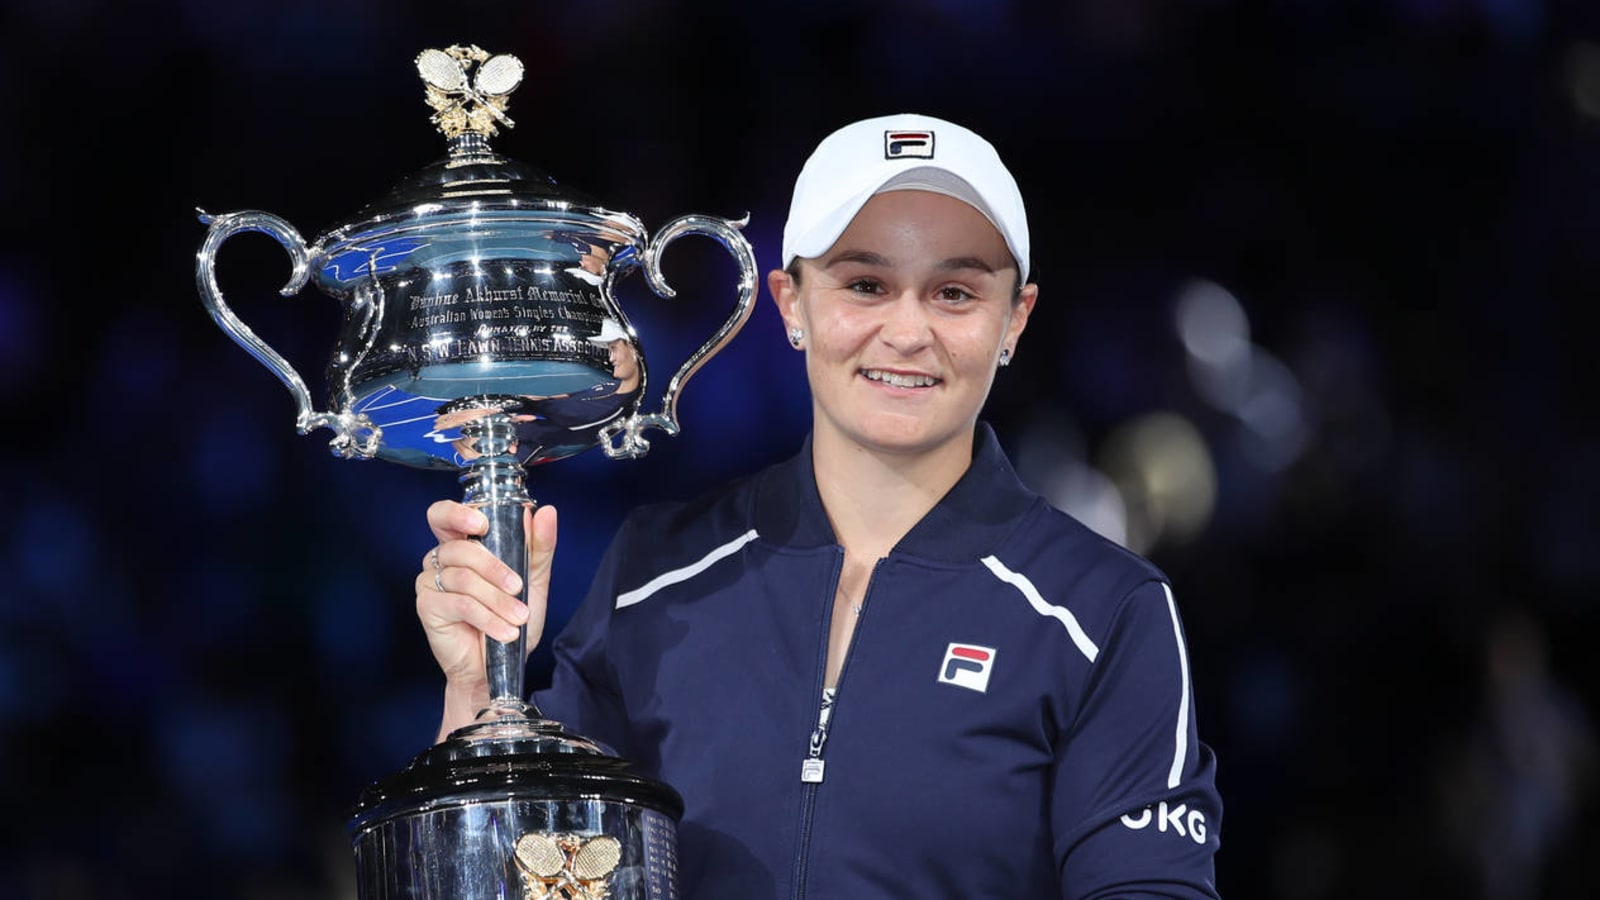 Ash Barty is first Aussie to win Australian Open since '78